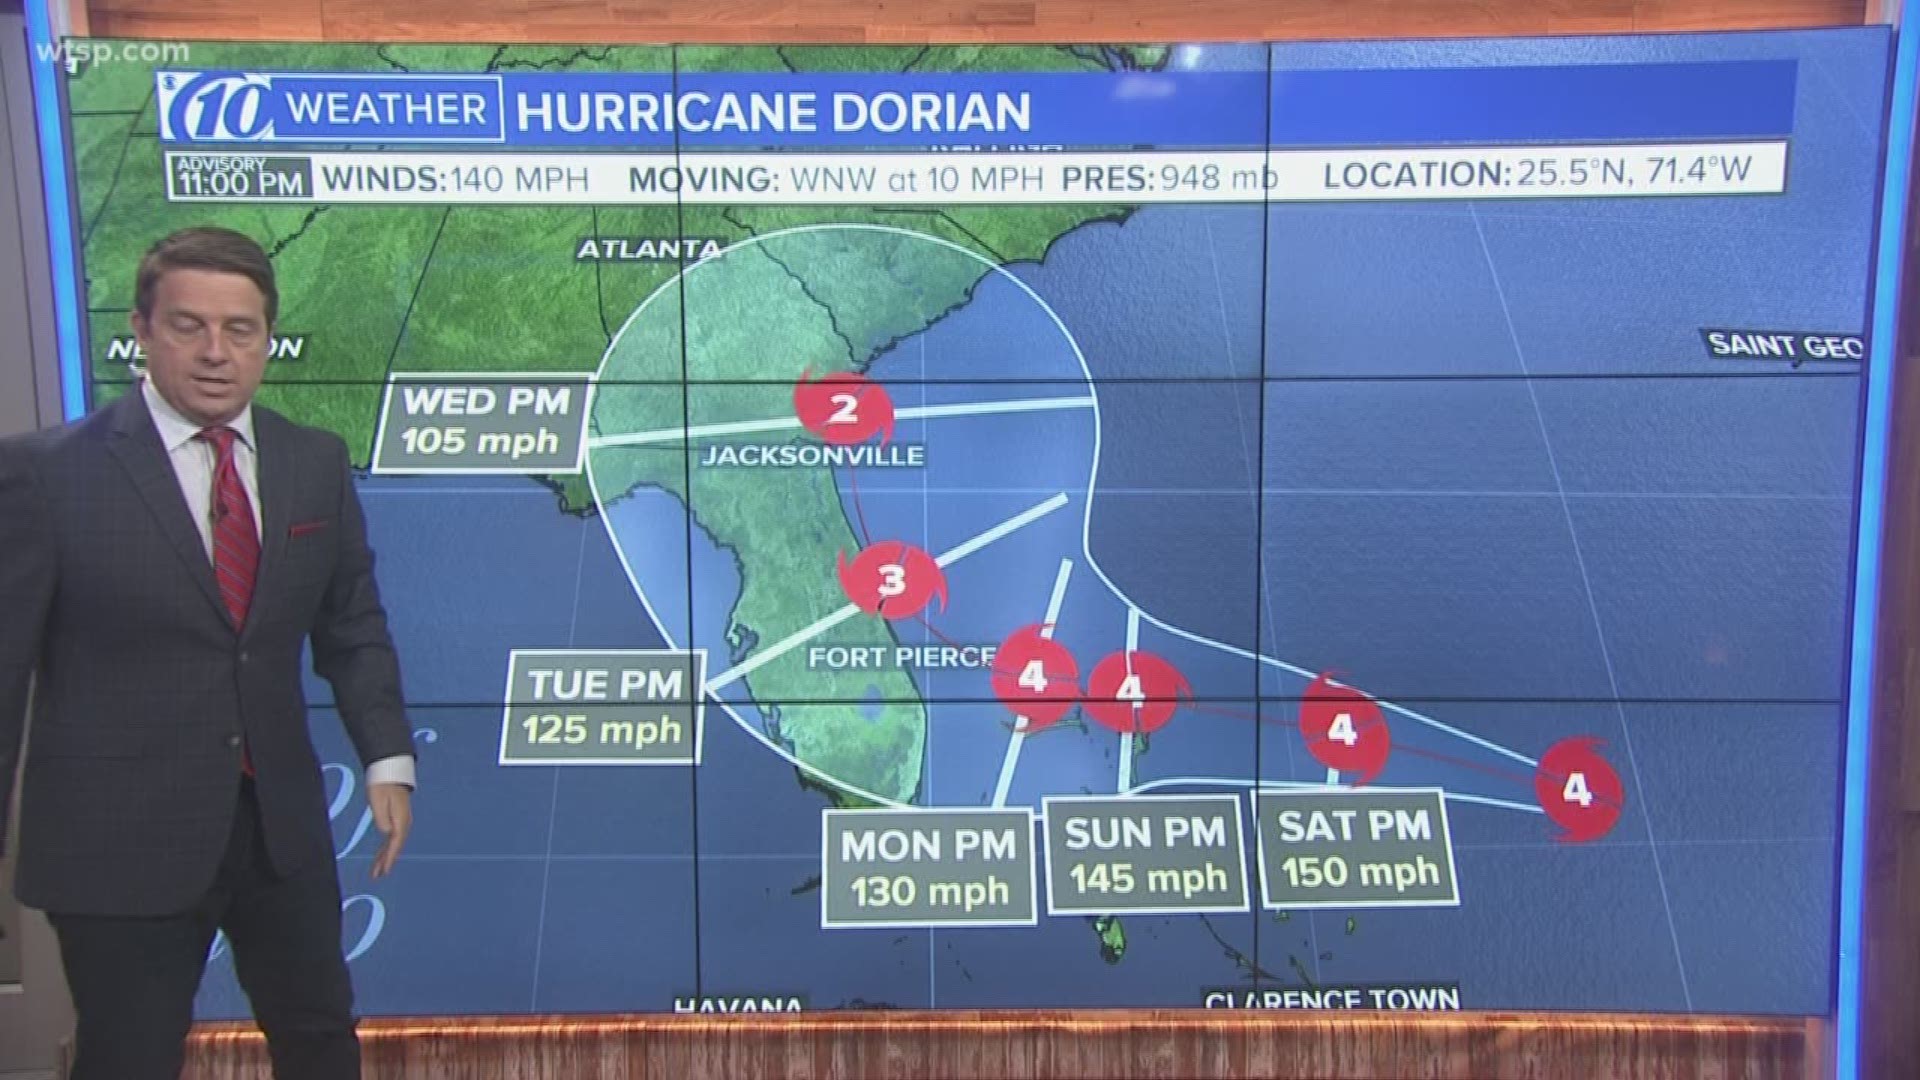 At 11 p.m. the National Hurricane Center moved Hurricane Dorian's track slightly to the east. 

The storm had sustained winds near 130 mph. 
The storm is currently moving west-northwest at about 10 mph.

At 8:30 p.m. the National Hurricane Center said Hurricane Dorian had strengthened into an extremely dangerous Category 4 hurricane.